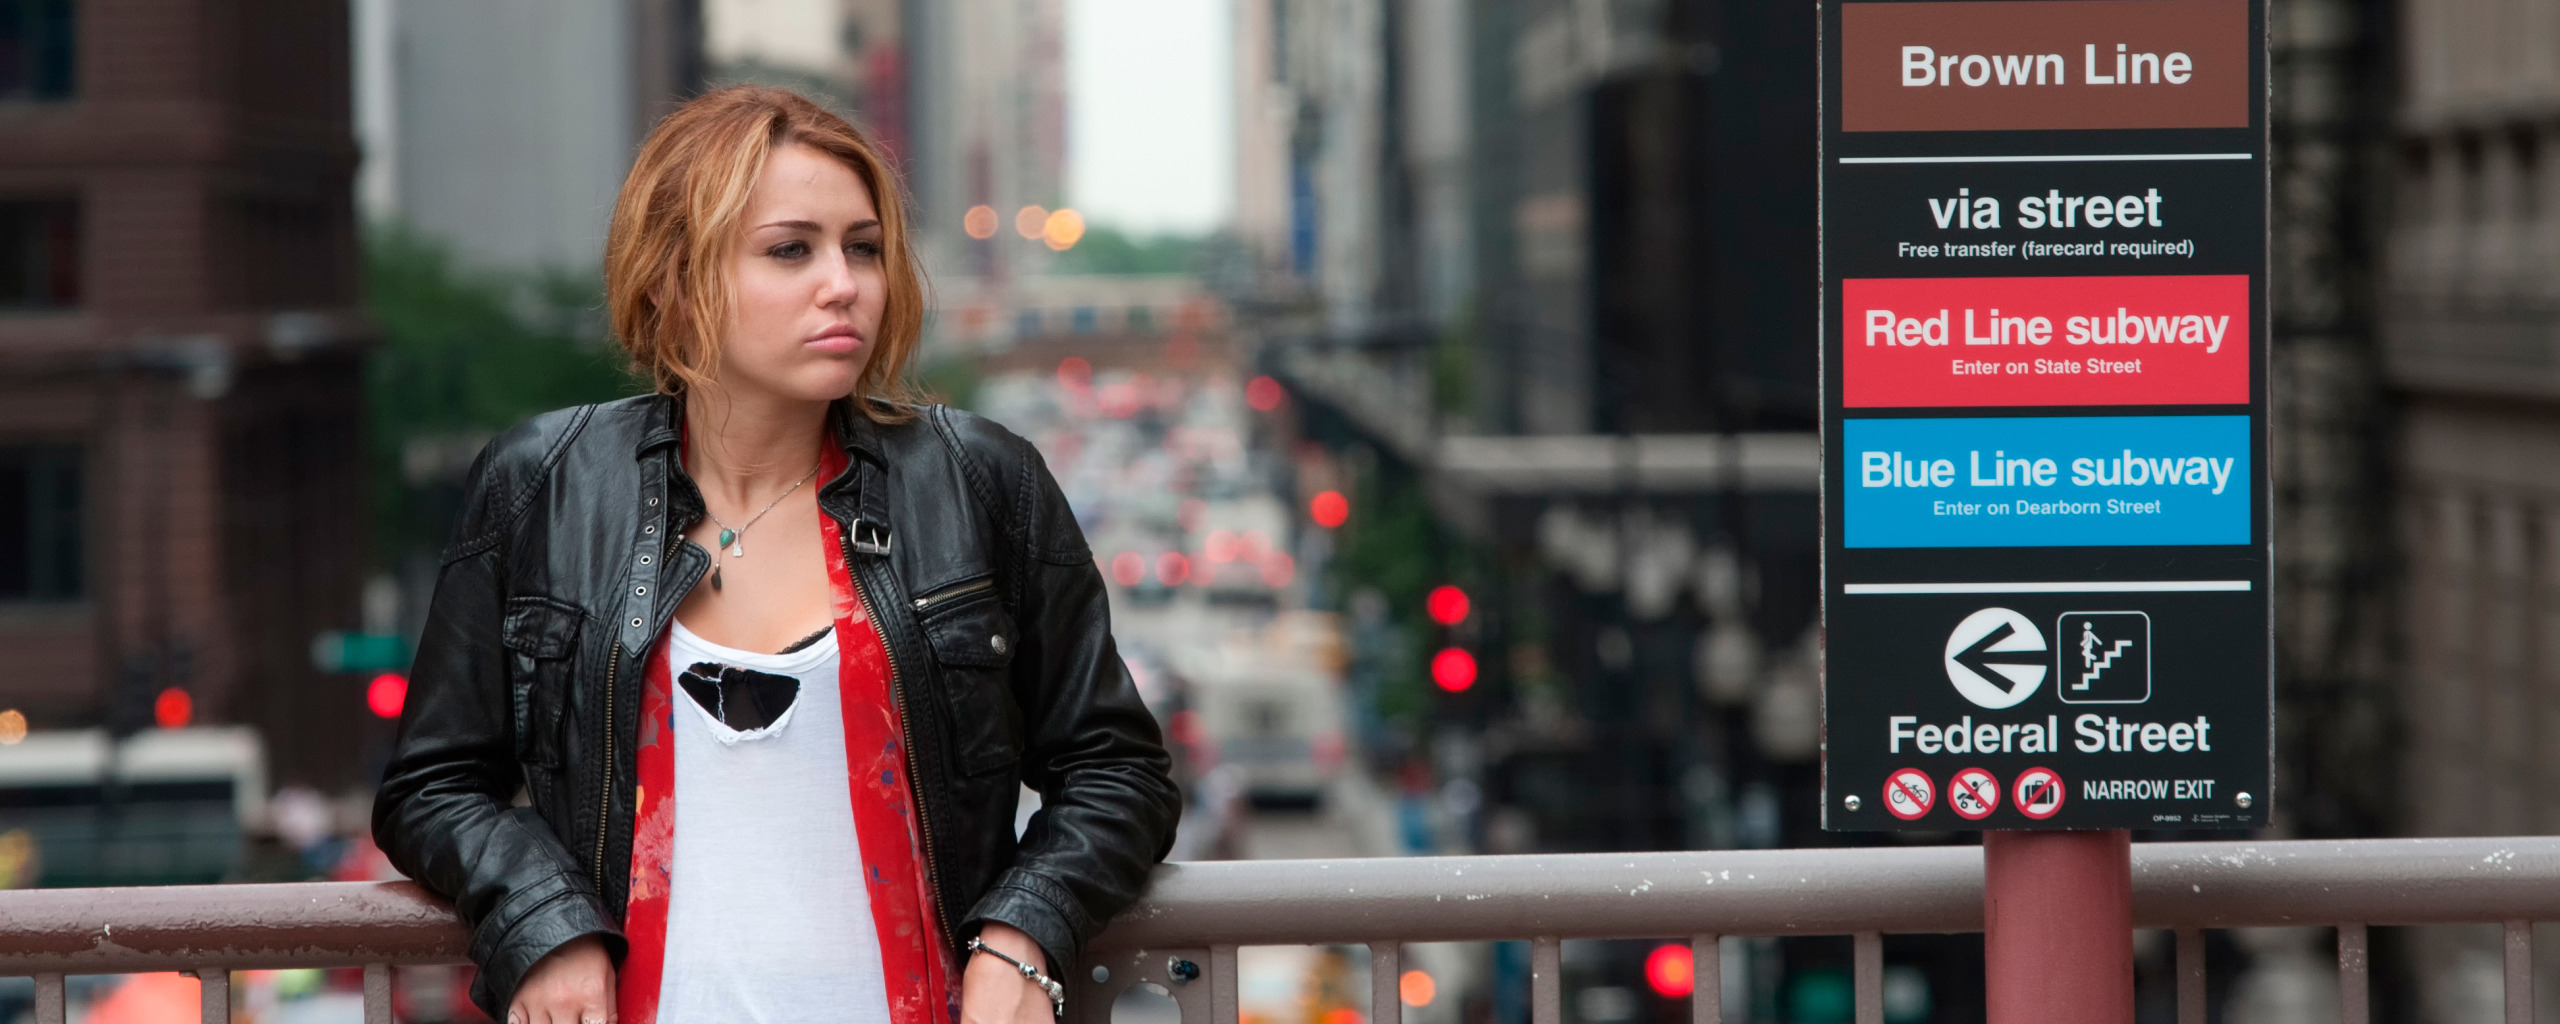 Miley Cyrus, LOL, From love to hate-one SMS, Summer Classmates Love. 